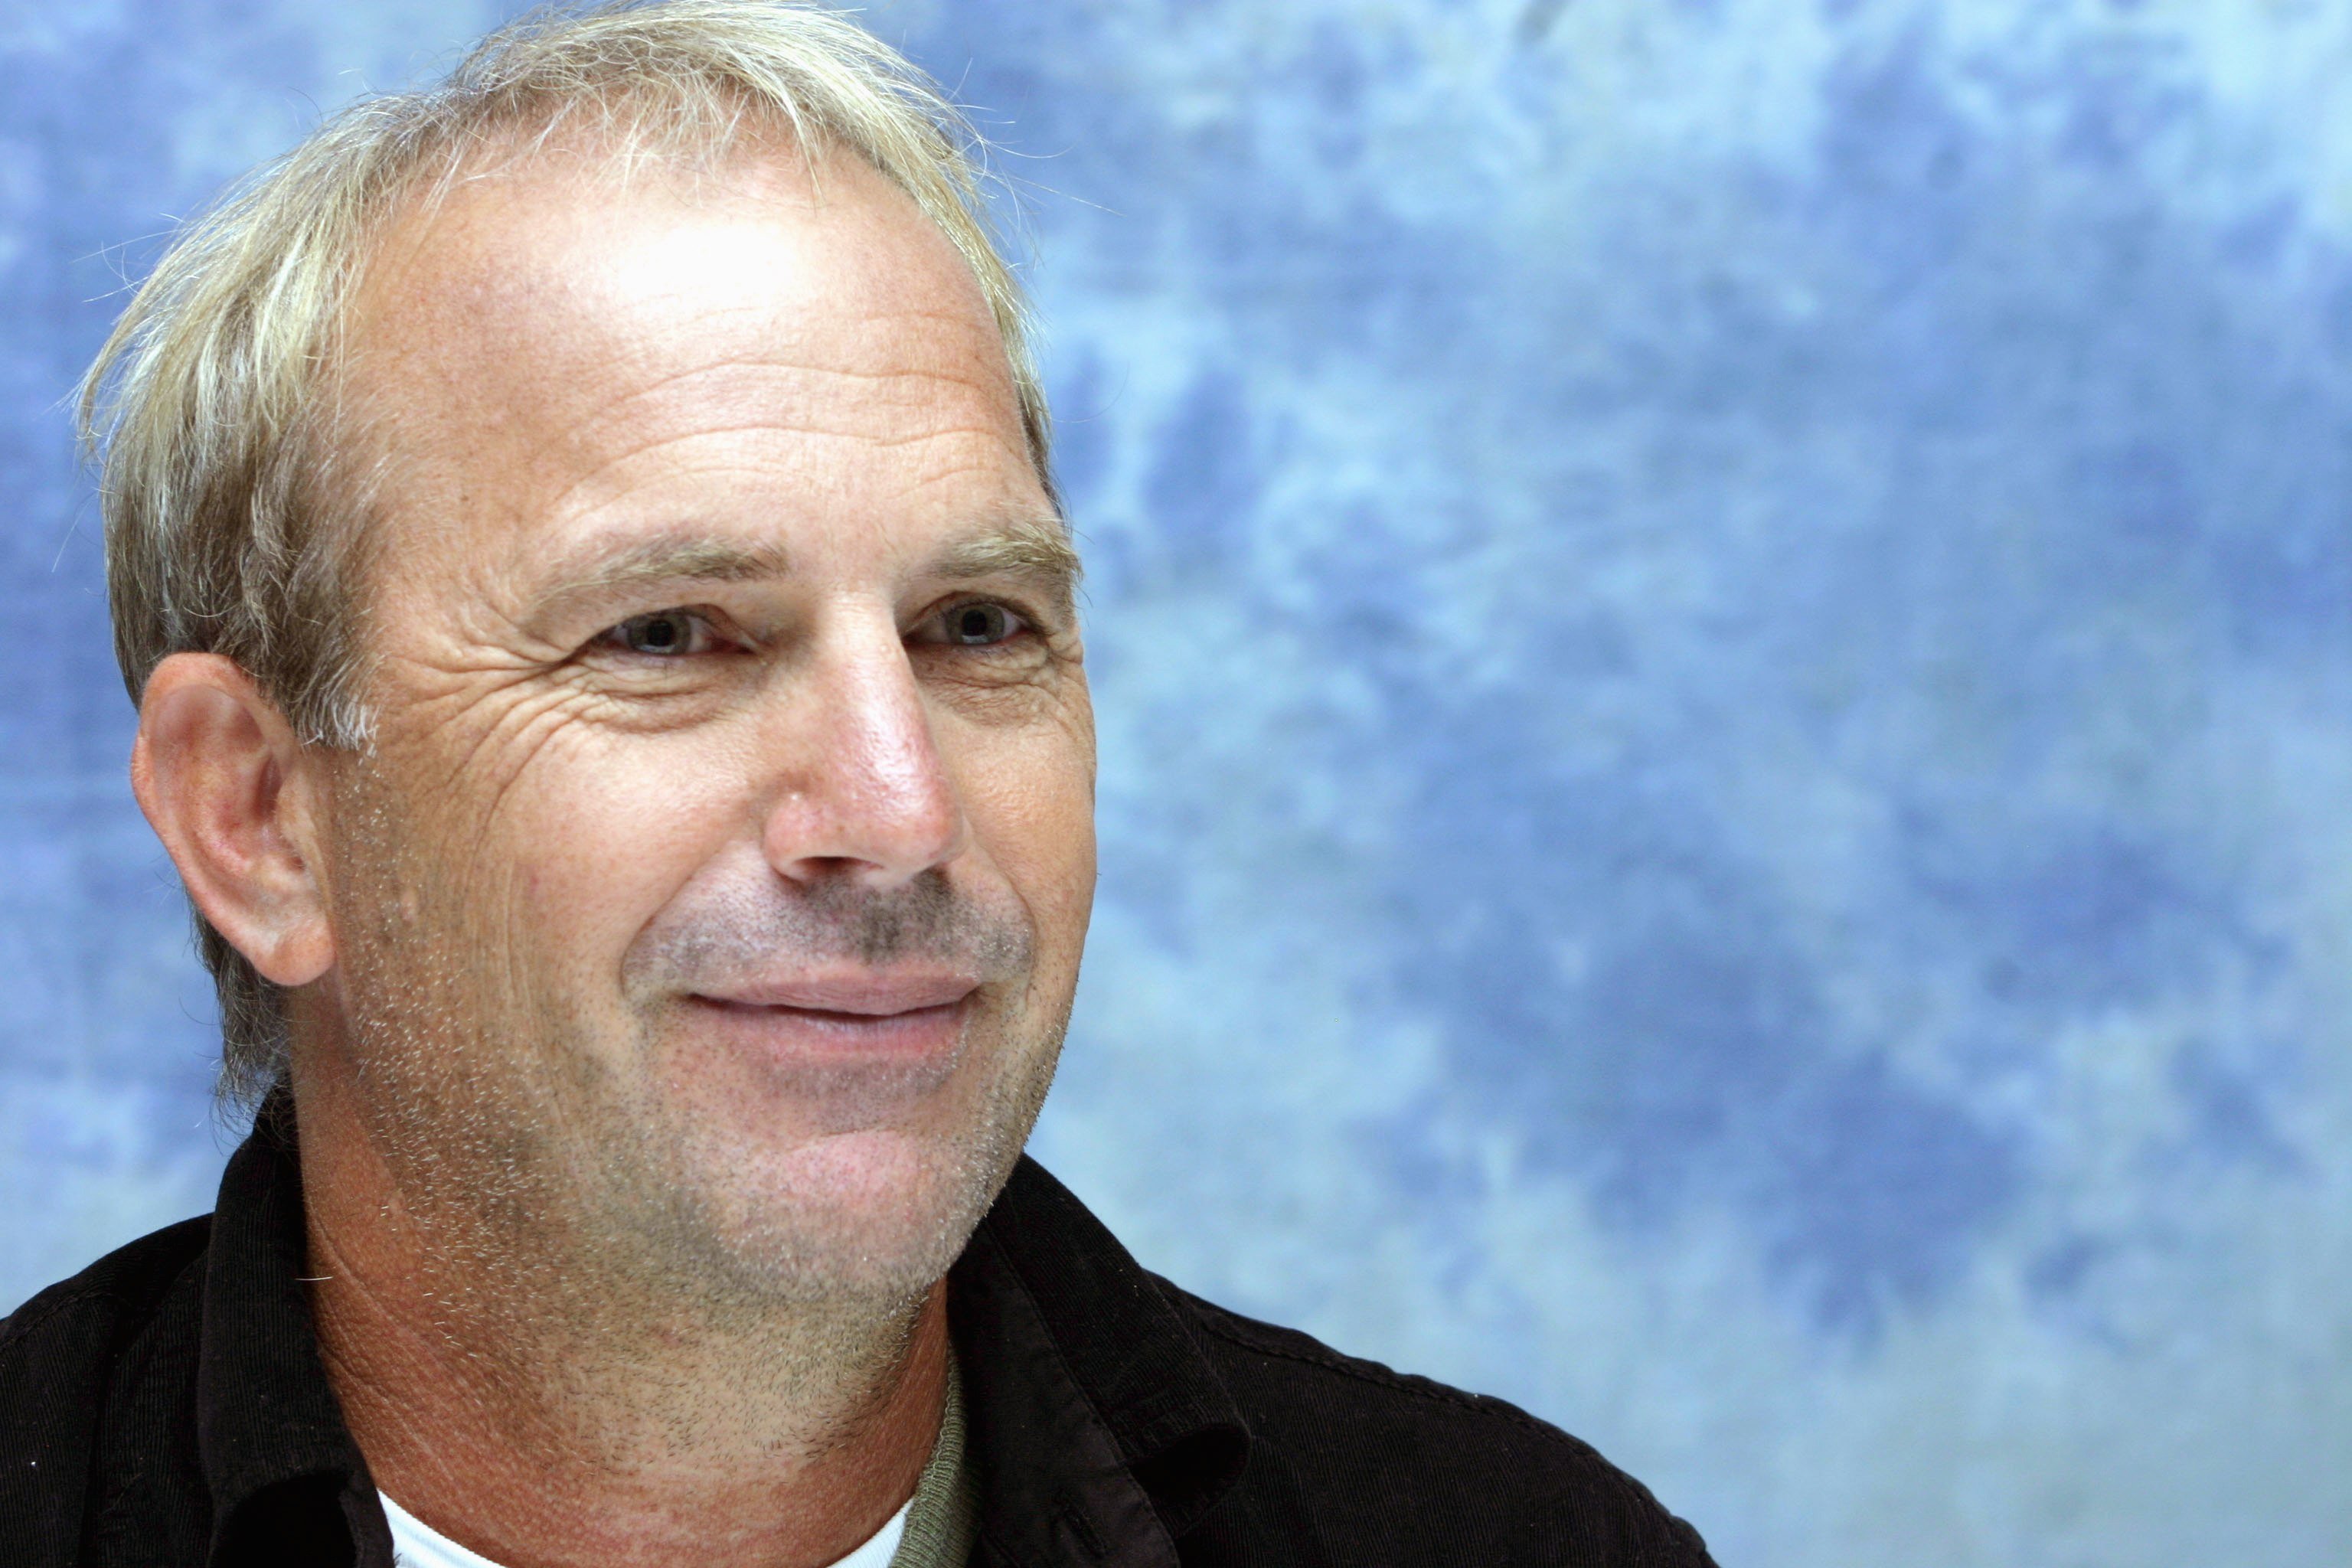 Kevin Costner talks at the Four Seasons Hotel on September 9, 2006 | Photo: GettyImages